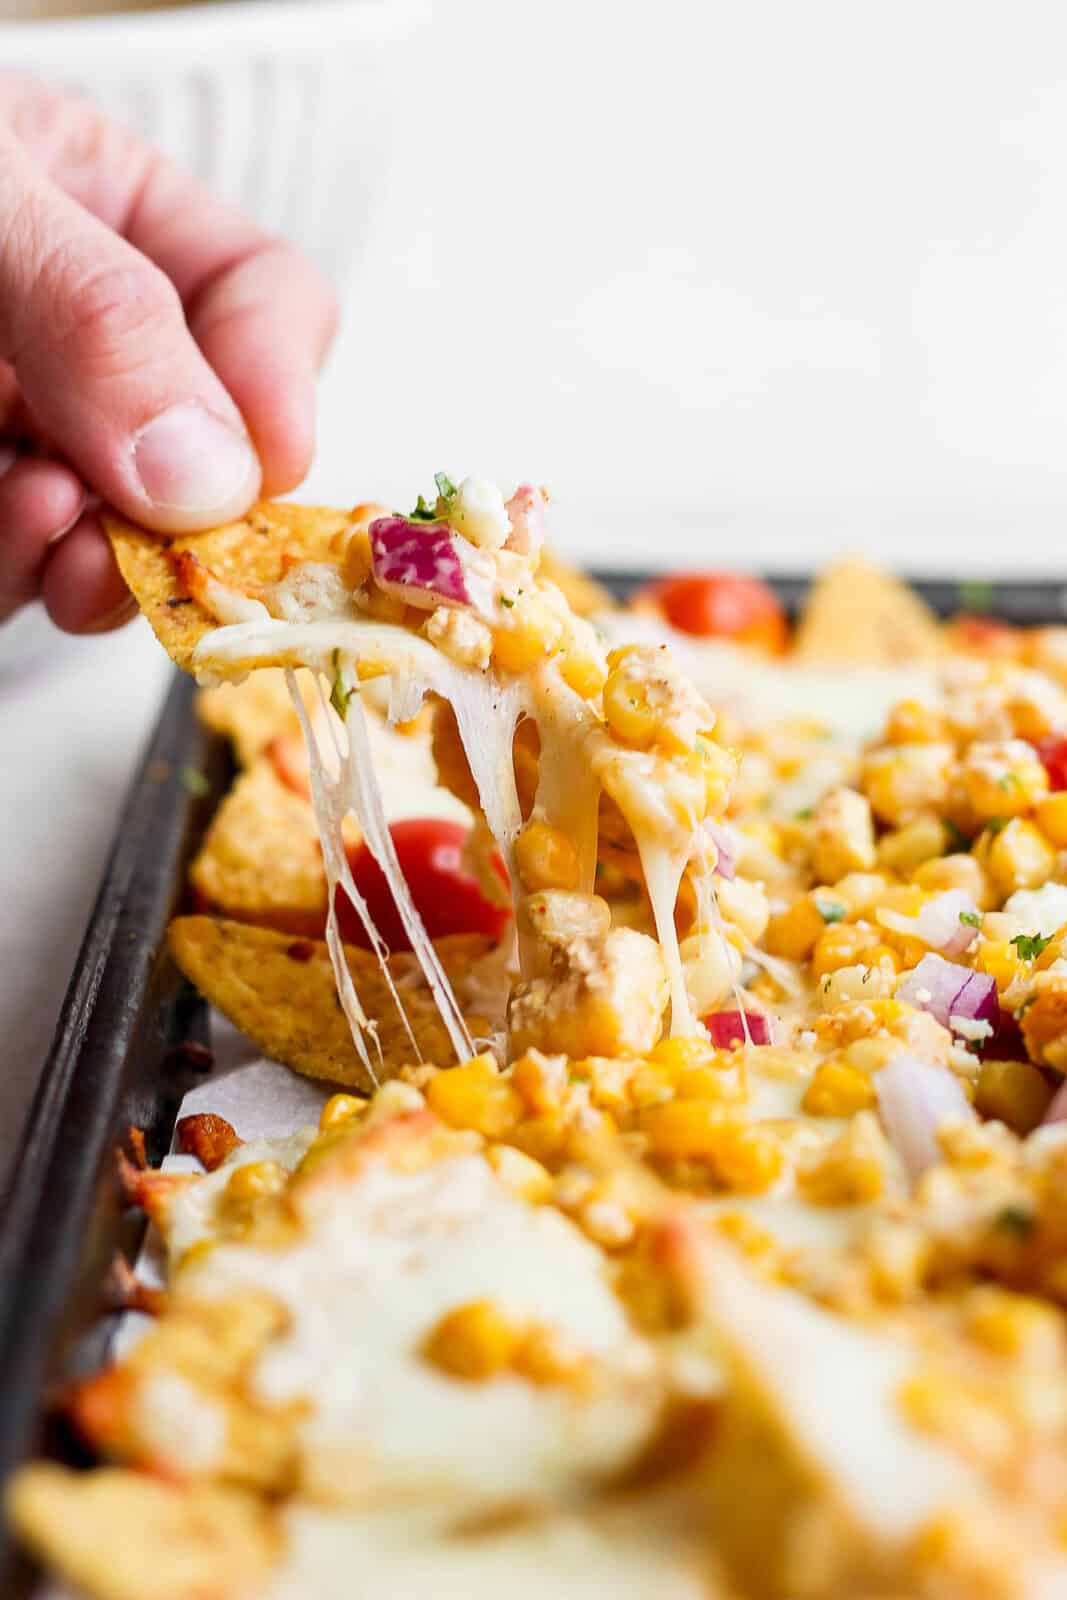 A hand pulling one chip with toppings from the pan.